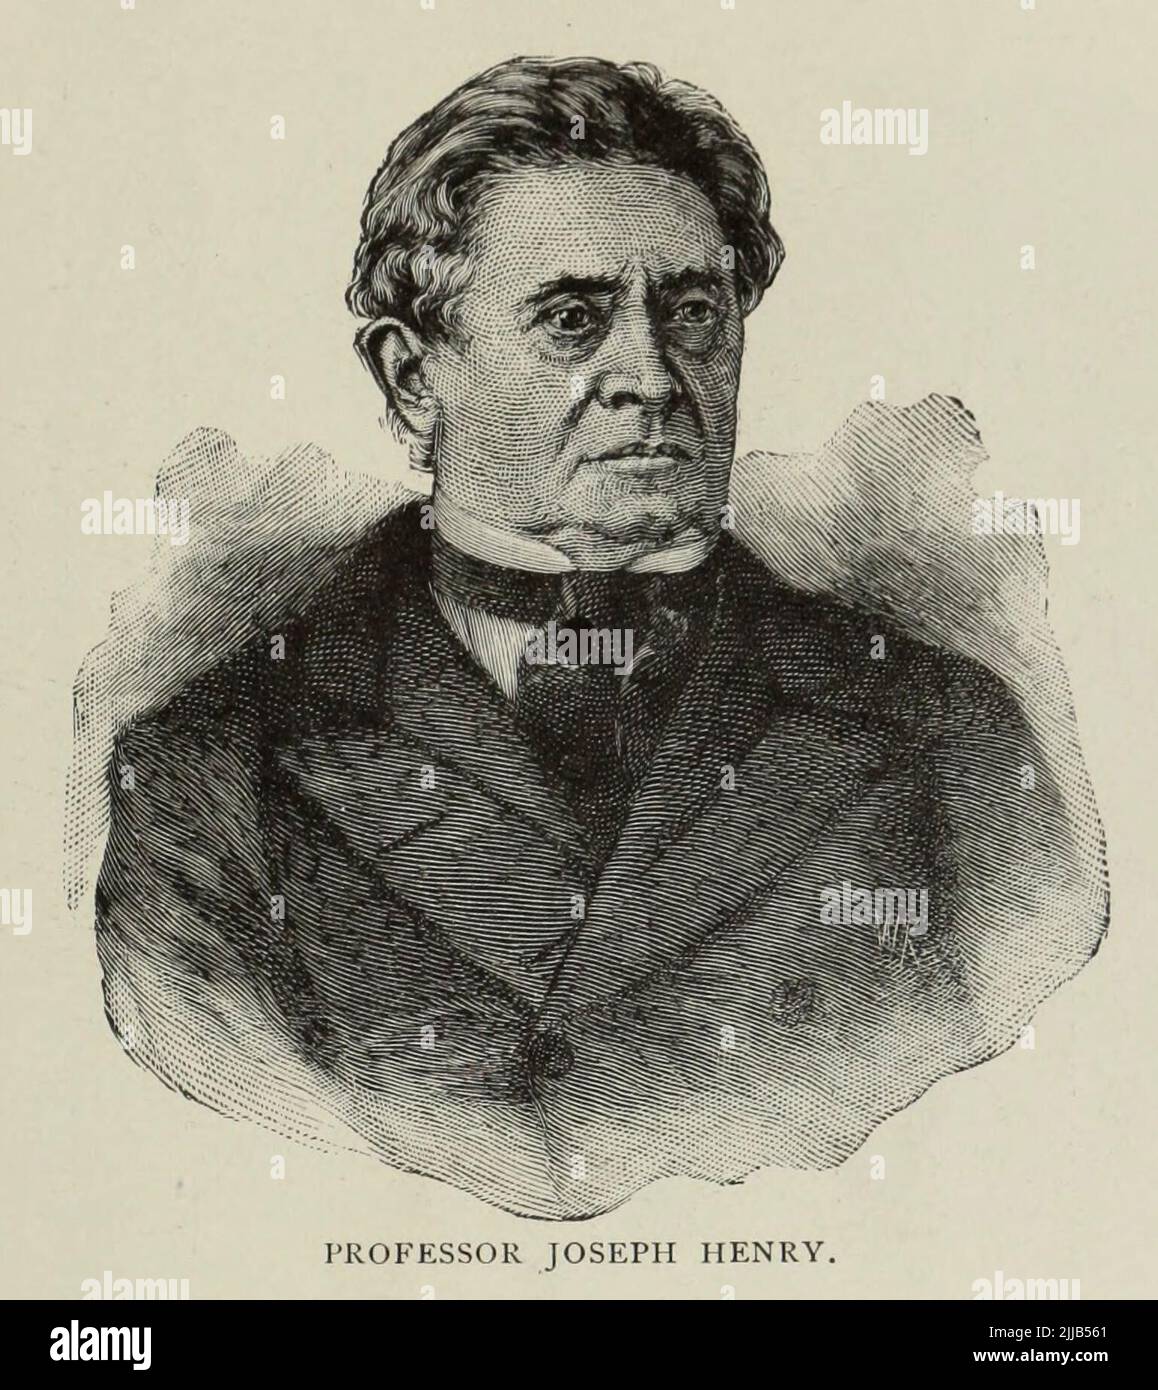 Joseph Henry (December 17, 1797 – May 13, 1878) was an American scientist who served as the first Secretary of the Smithsonian Institution. from the article ' BEGINNINGS AND FUTURE OF THE ARC-LAMP ' by S. M. Hamill  from The Engineering Magazine DEVOTED TO INDUSTRIAL PROGRESS Volume VII April to September, 1894 NEW YORK The Engineering Magazine Co Stock Photo